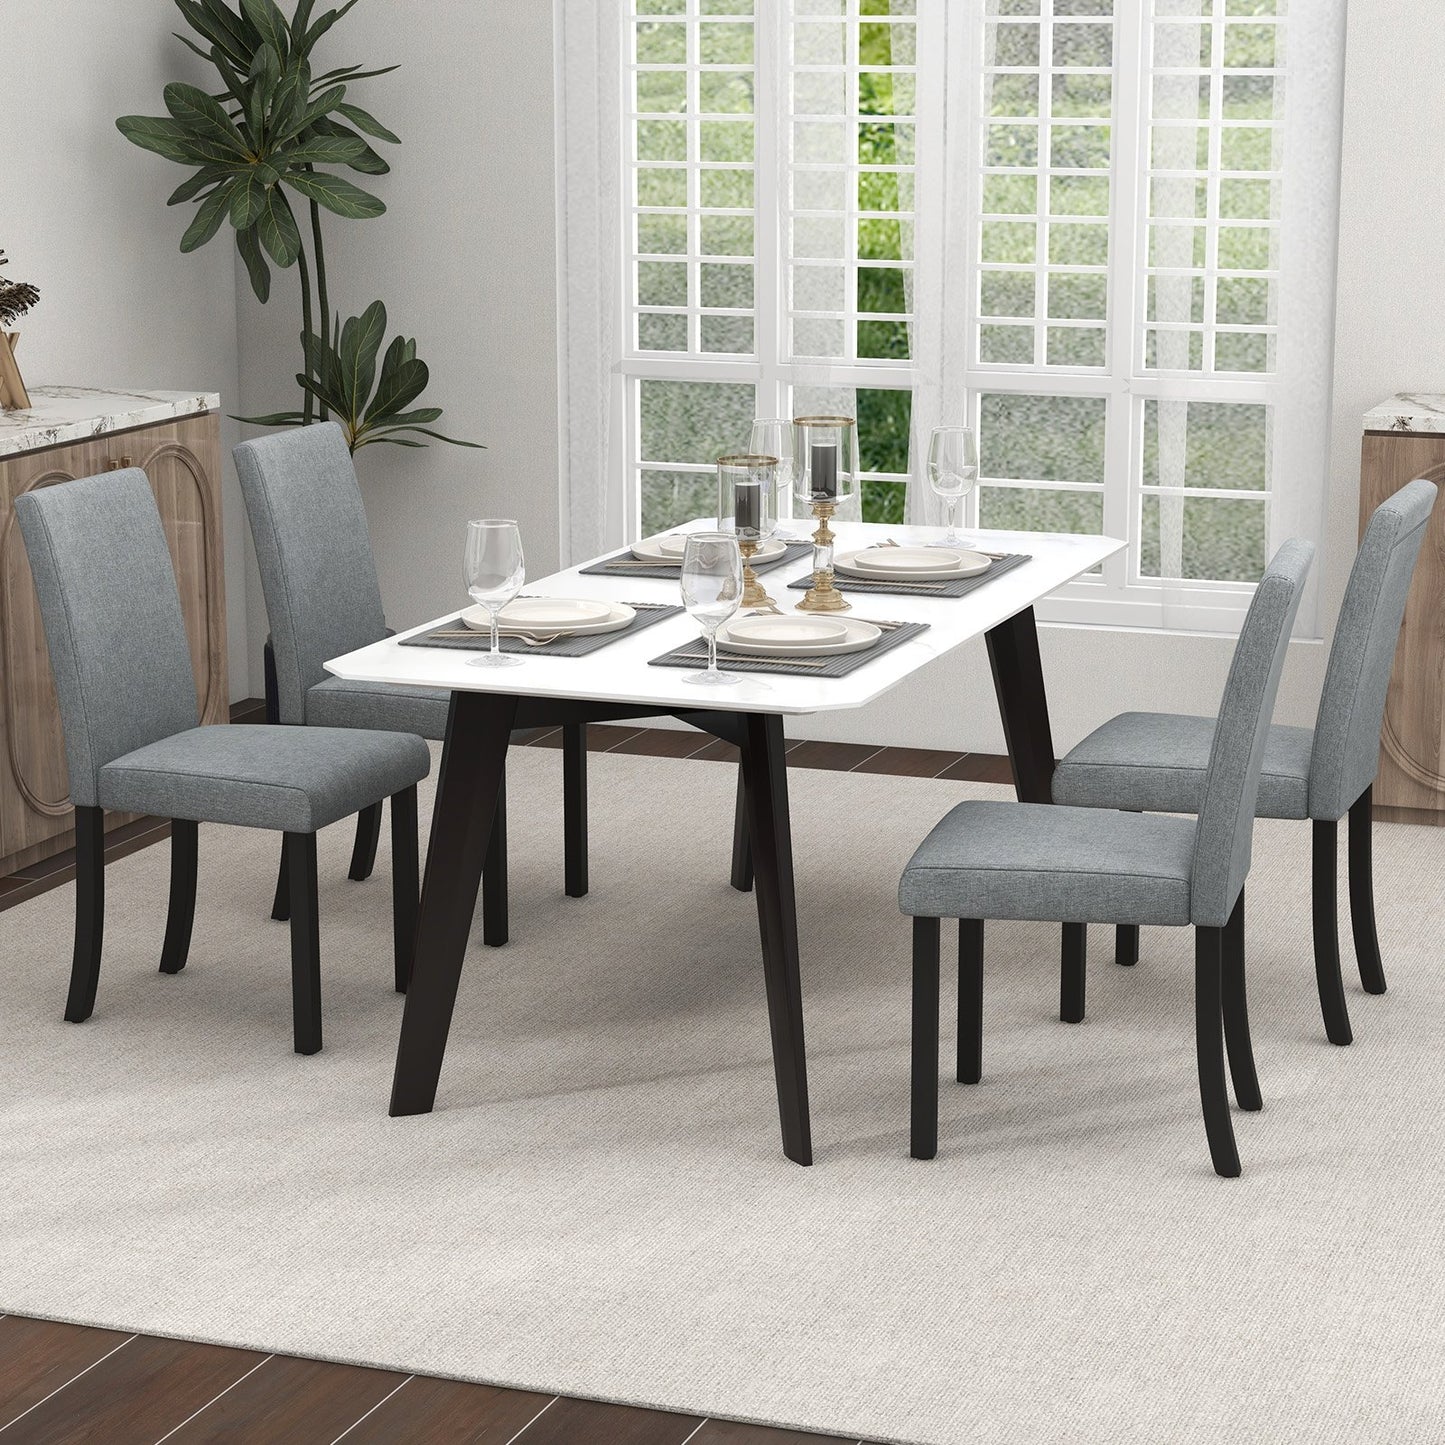 Dining Chair Set of 4 Upholstered Kitchen Dinette Chairs with Wood Frame, Gray